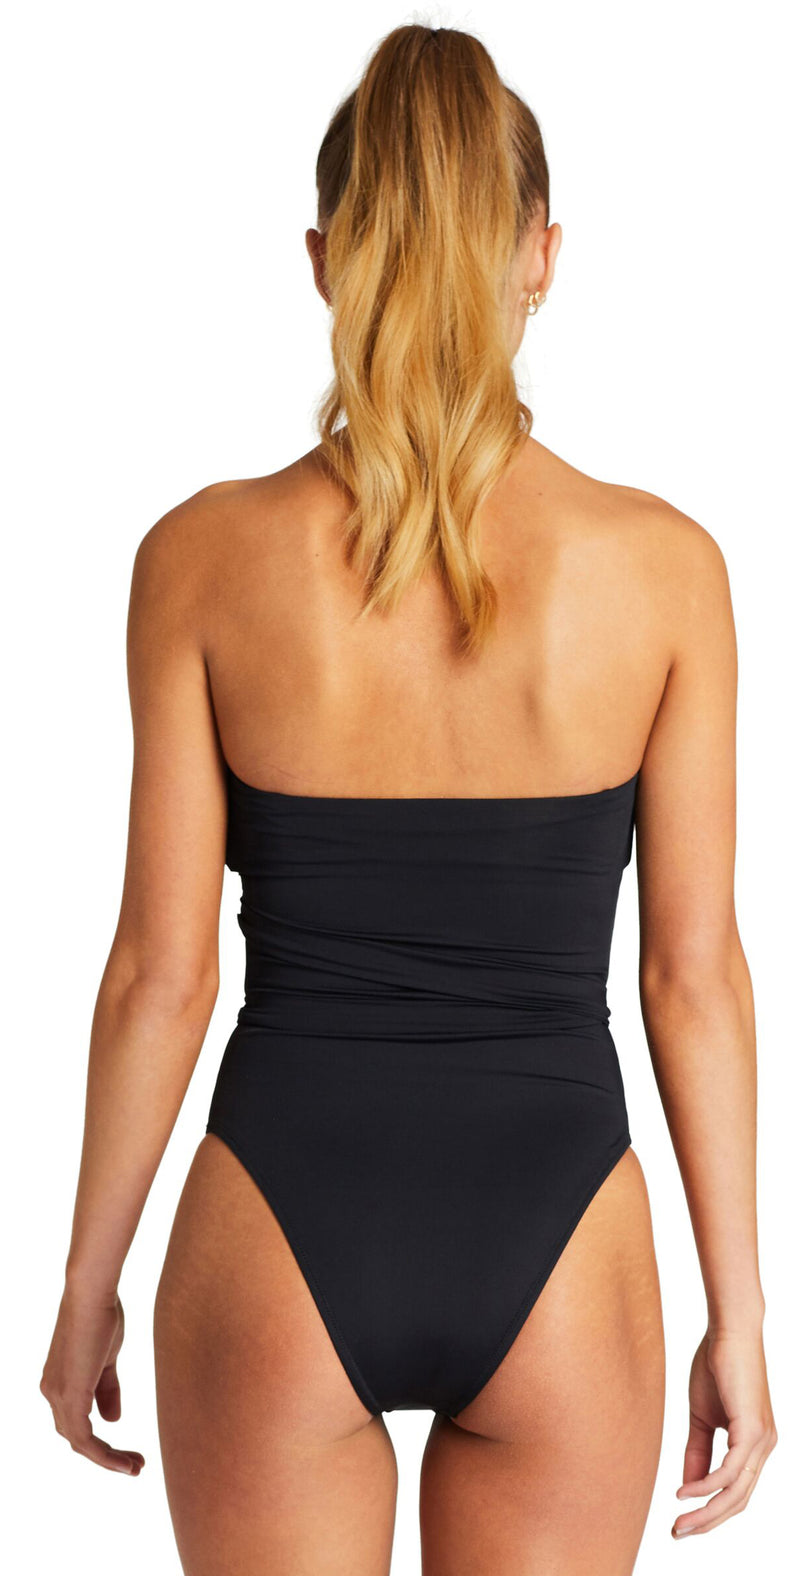 Vitamin A EcoLux Marylyn One Piece Swimsuit in Black 930M ECB back no straps